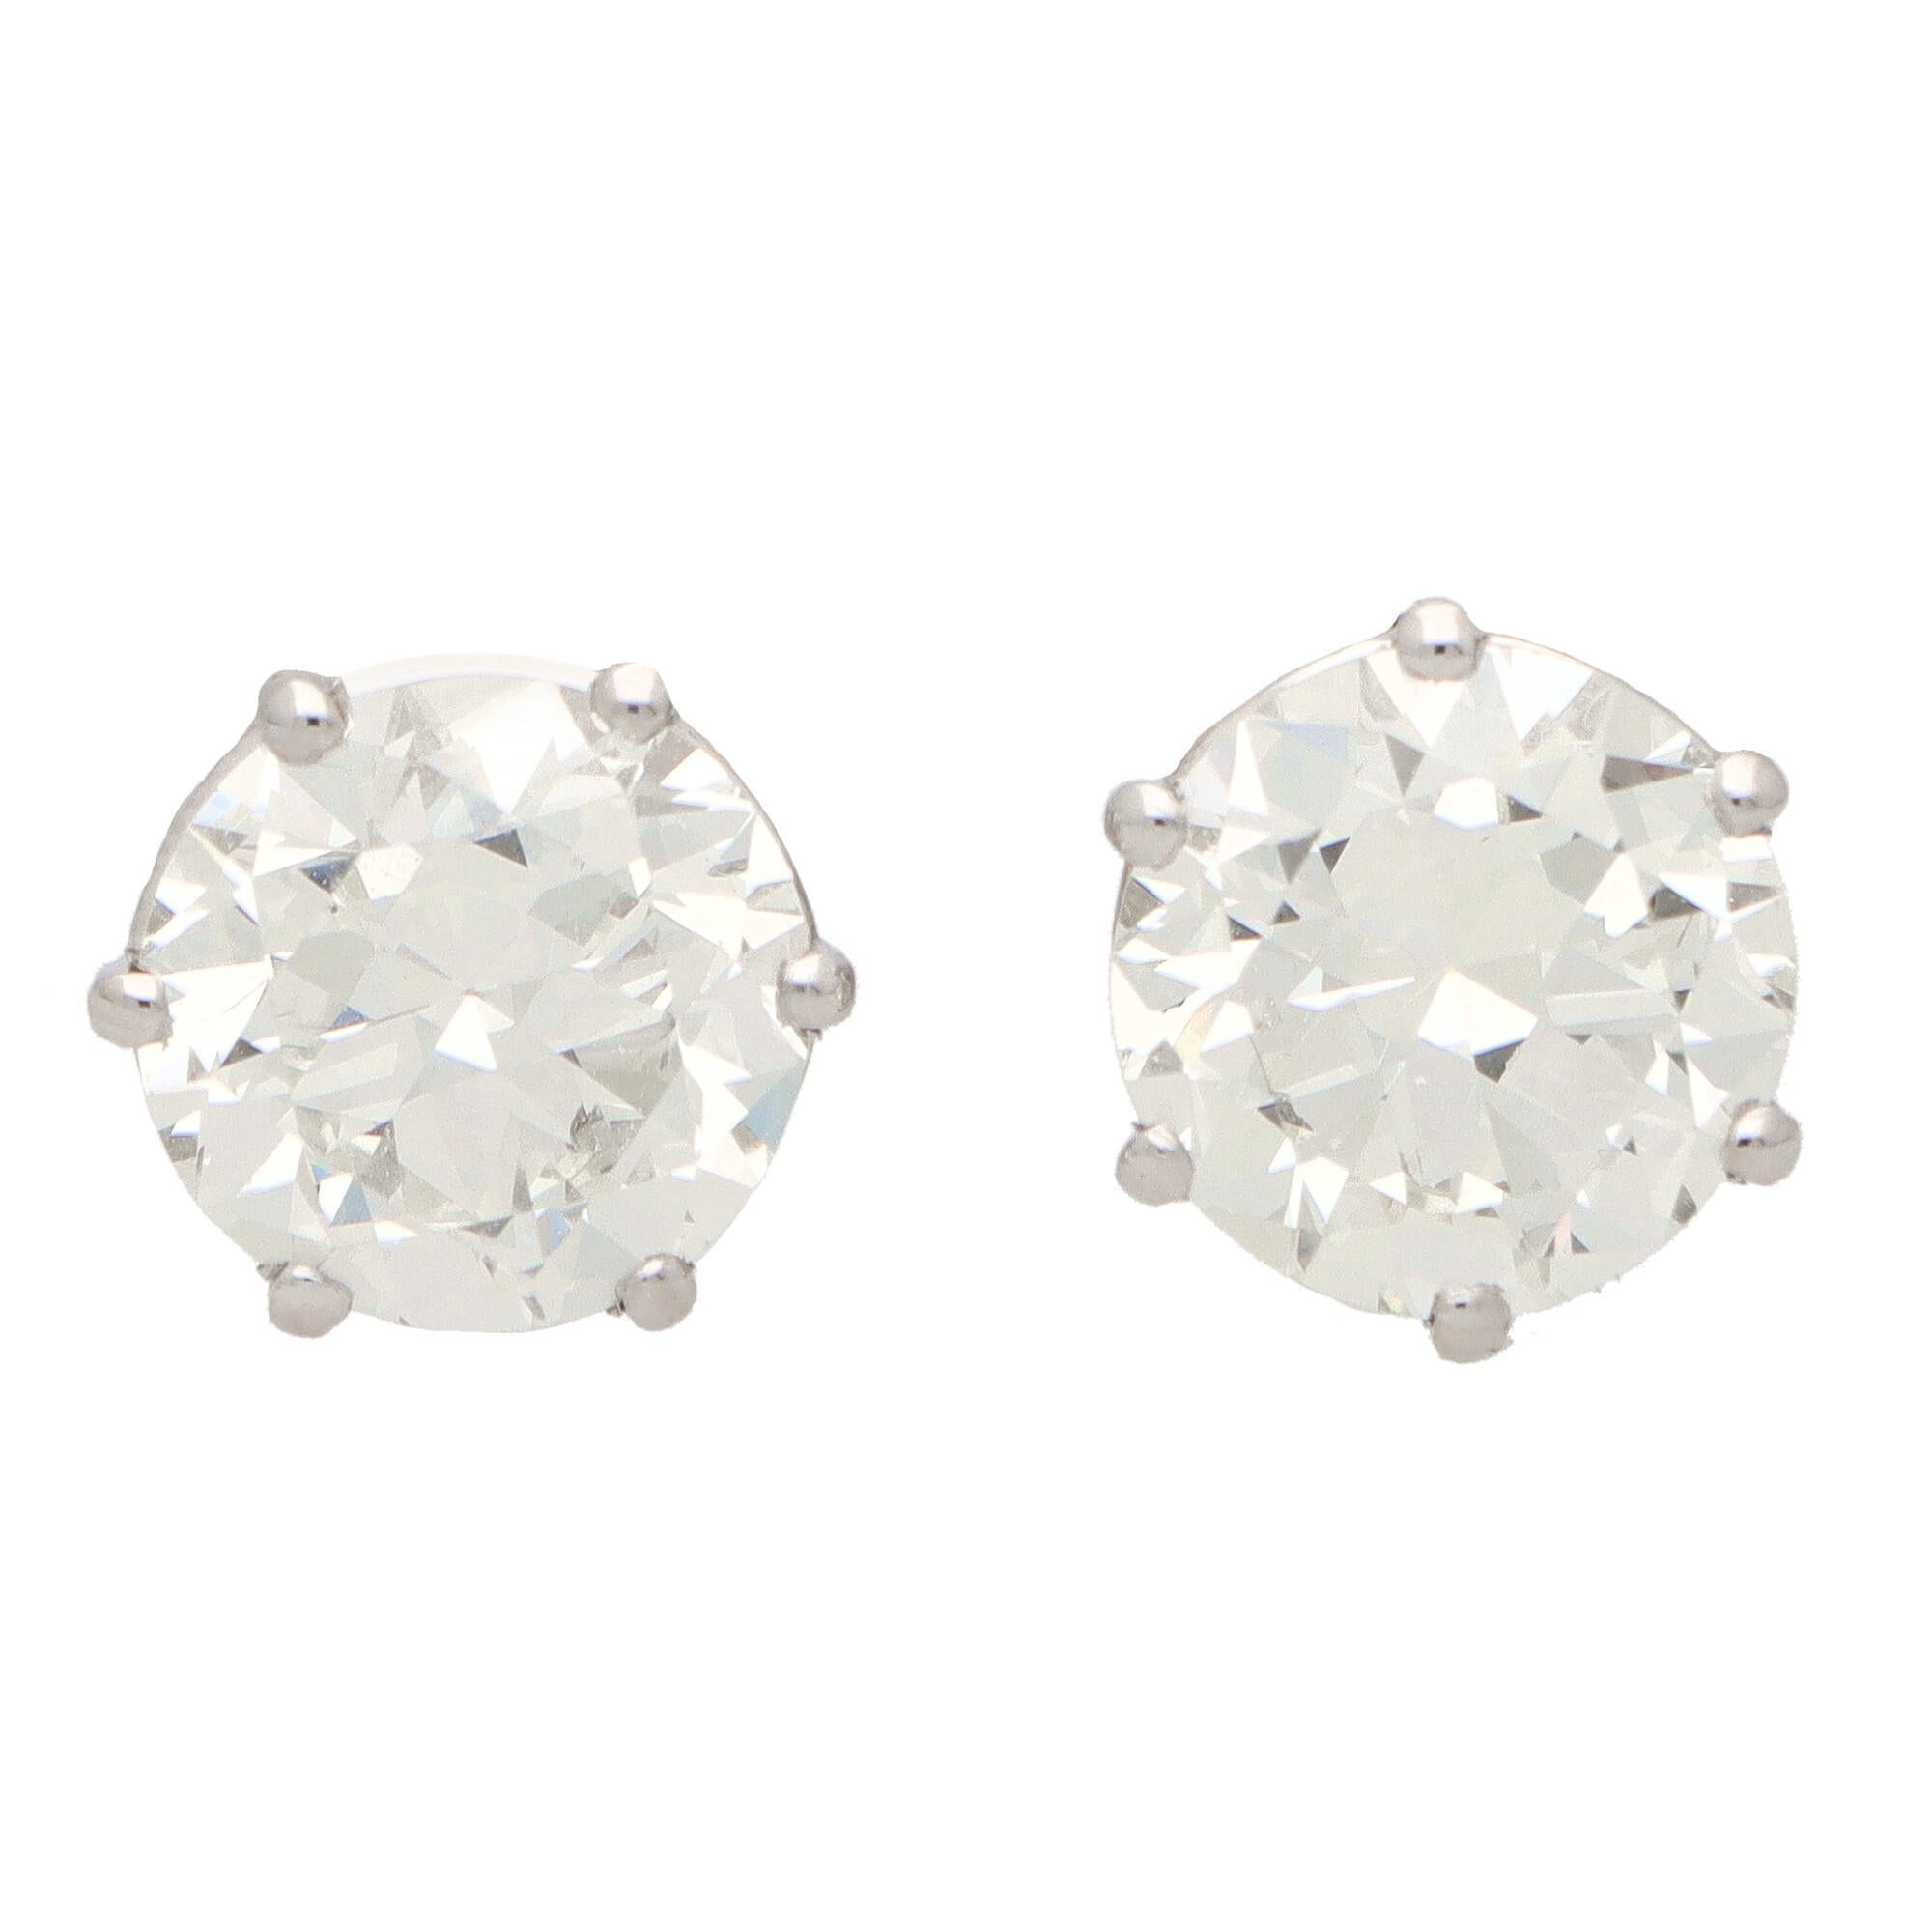 Certified 6.19ct Round Brilliant Cut Diamond Solitaire Stud Earrings in Platinum For Sale